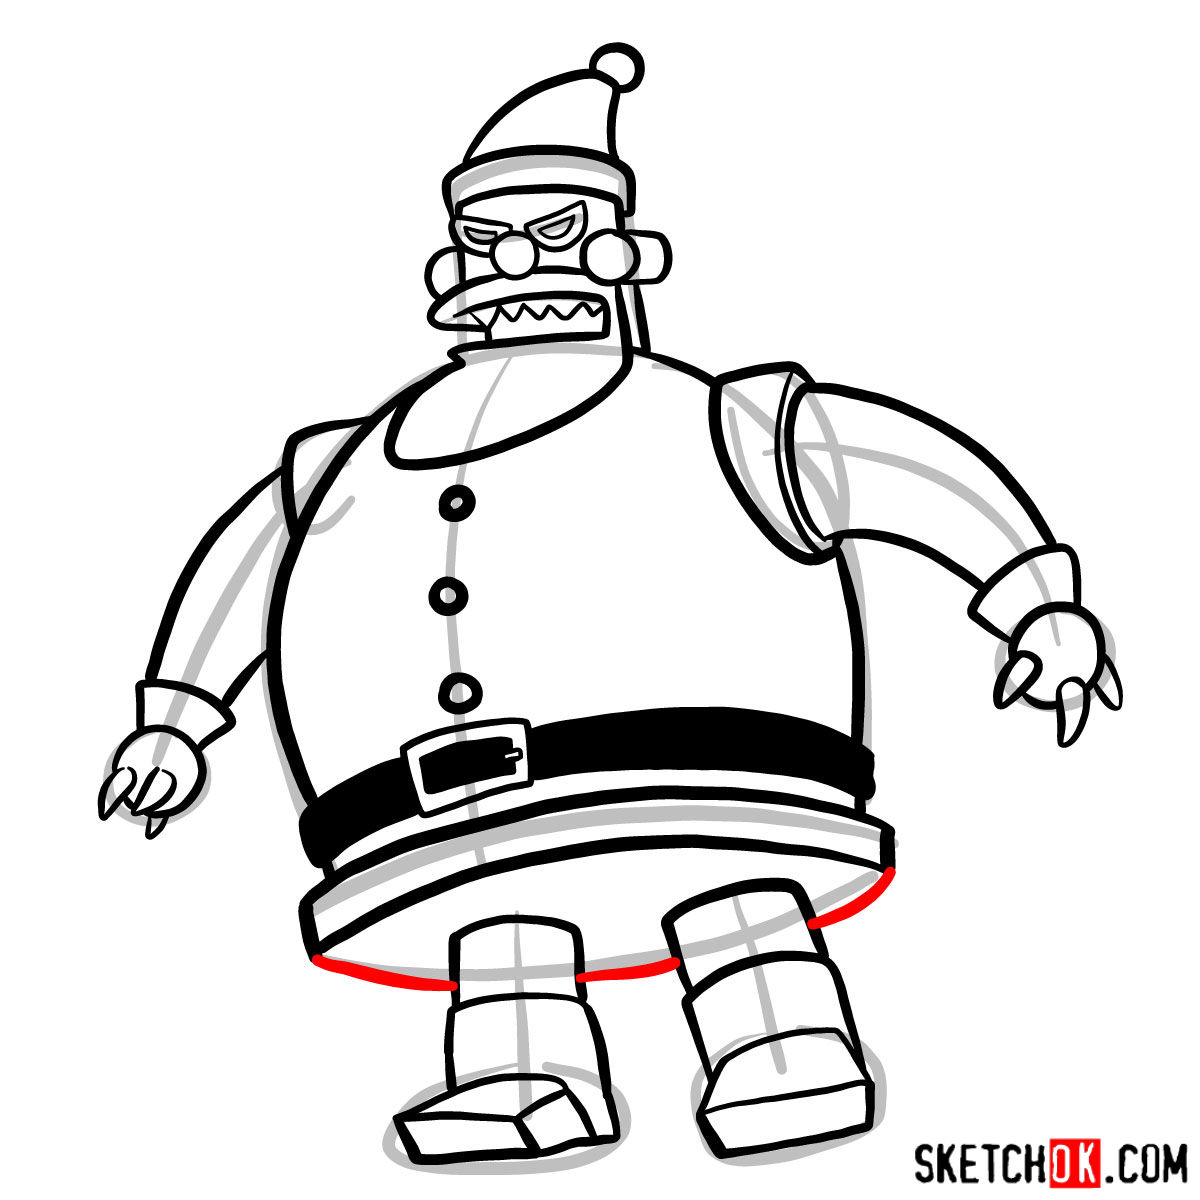 How to draw Robot Santa Claus - step 10